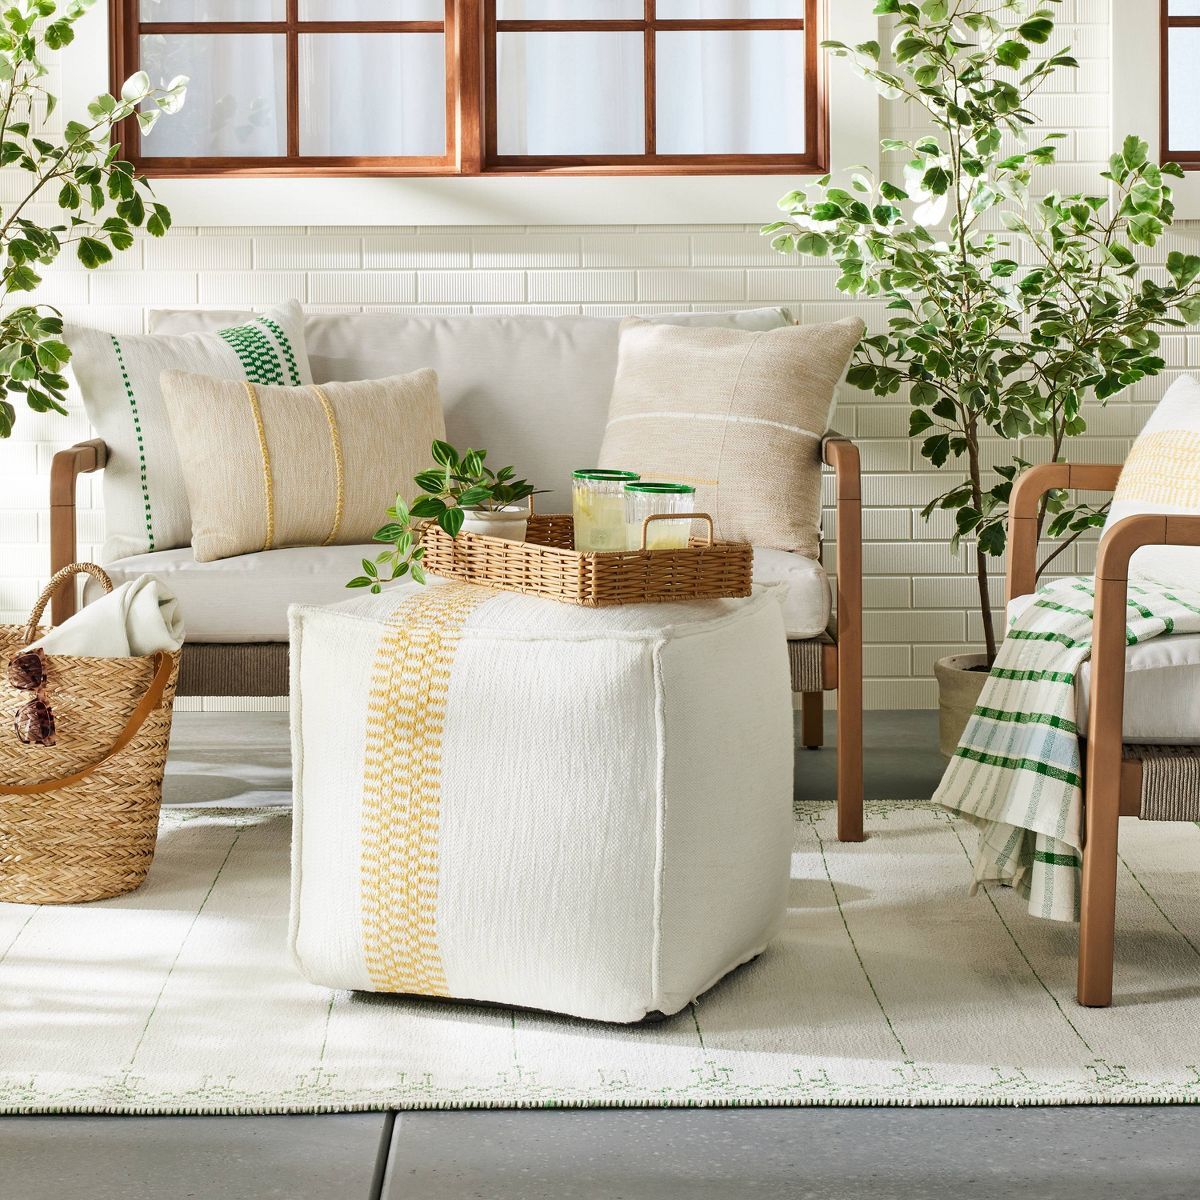 Checkered Stripe Indoor/Outdoor Ottoman Pouf - Hearth & Hand™ with Magnolia | Target